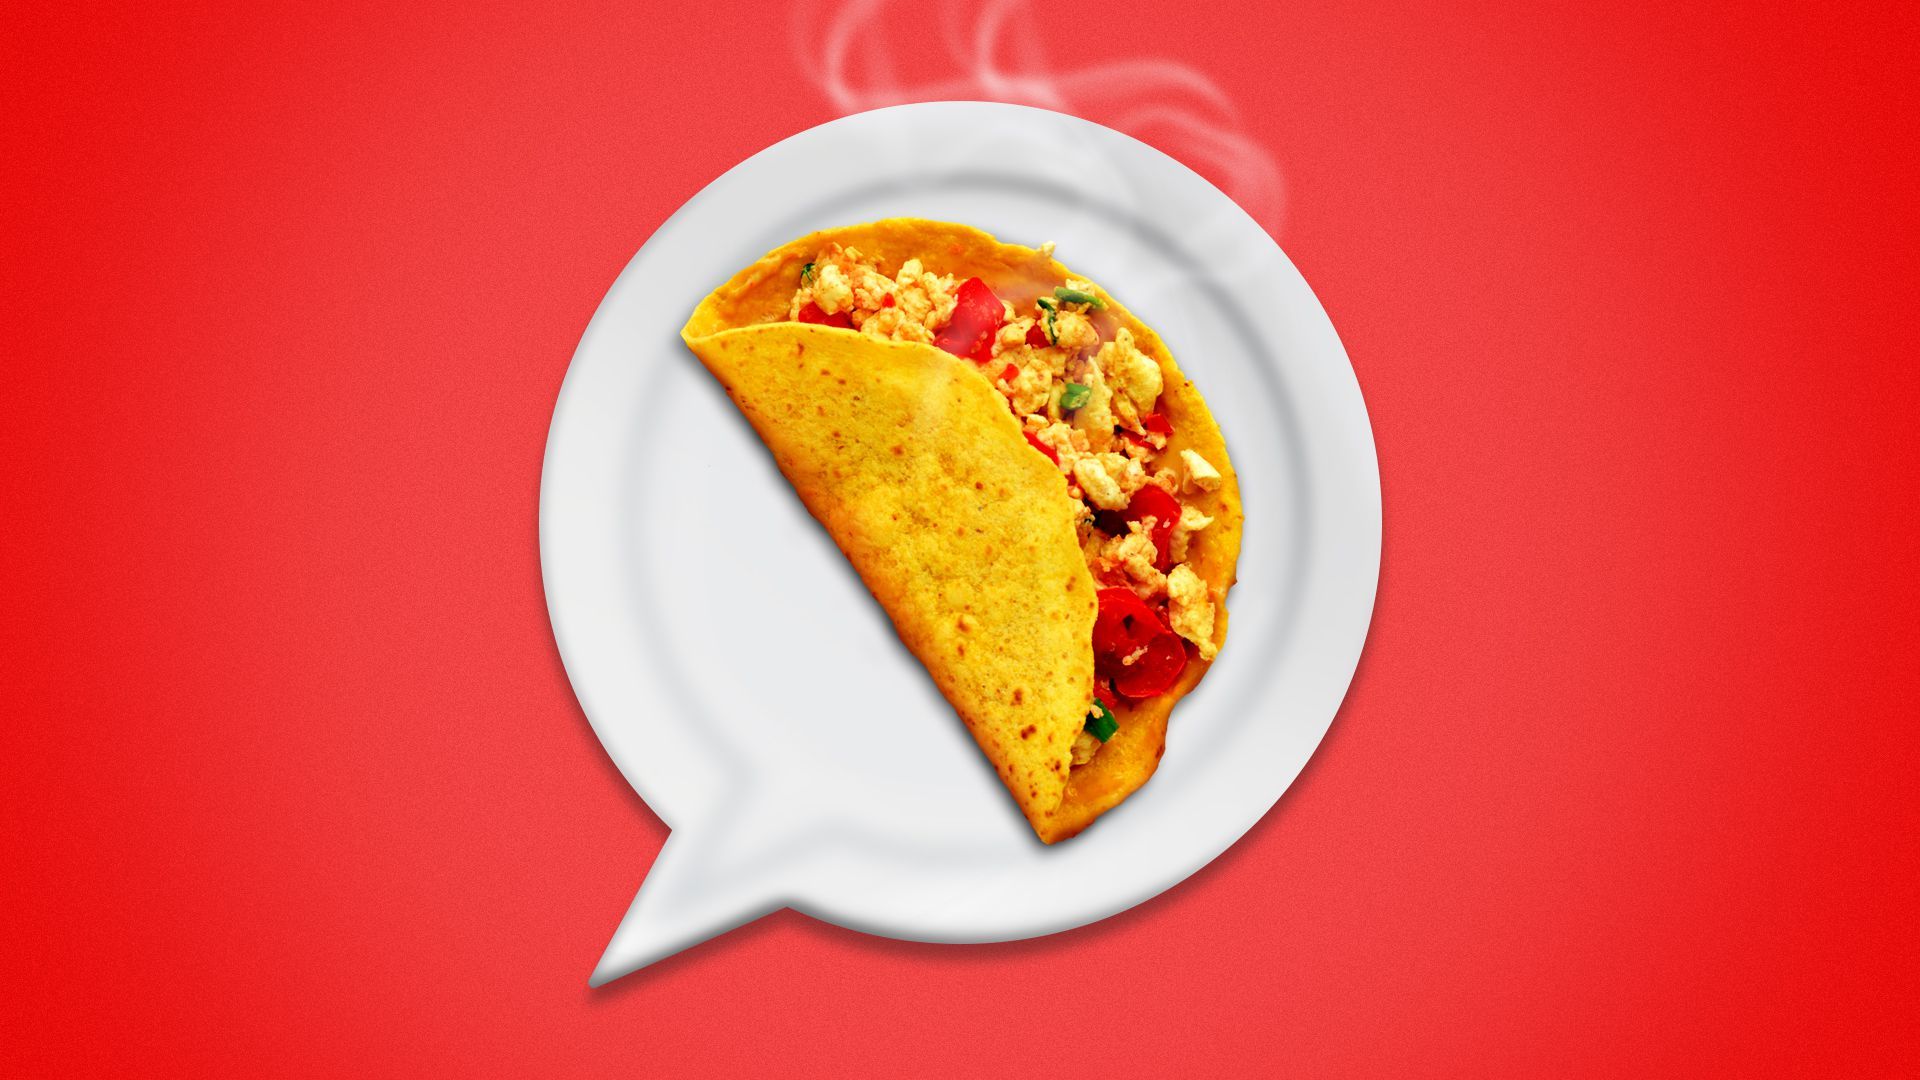 Illustration of a breakfast taco on a thought bubble-shaped plate